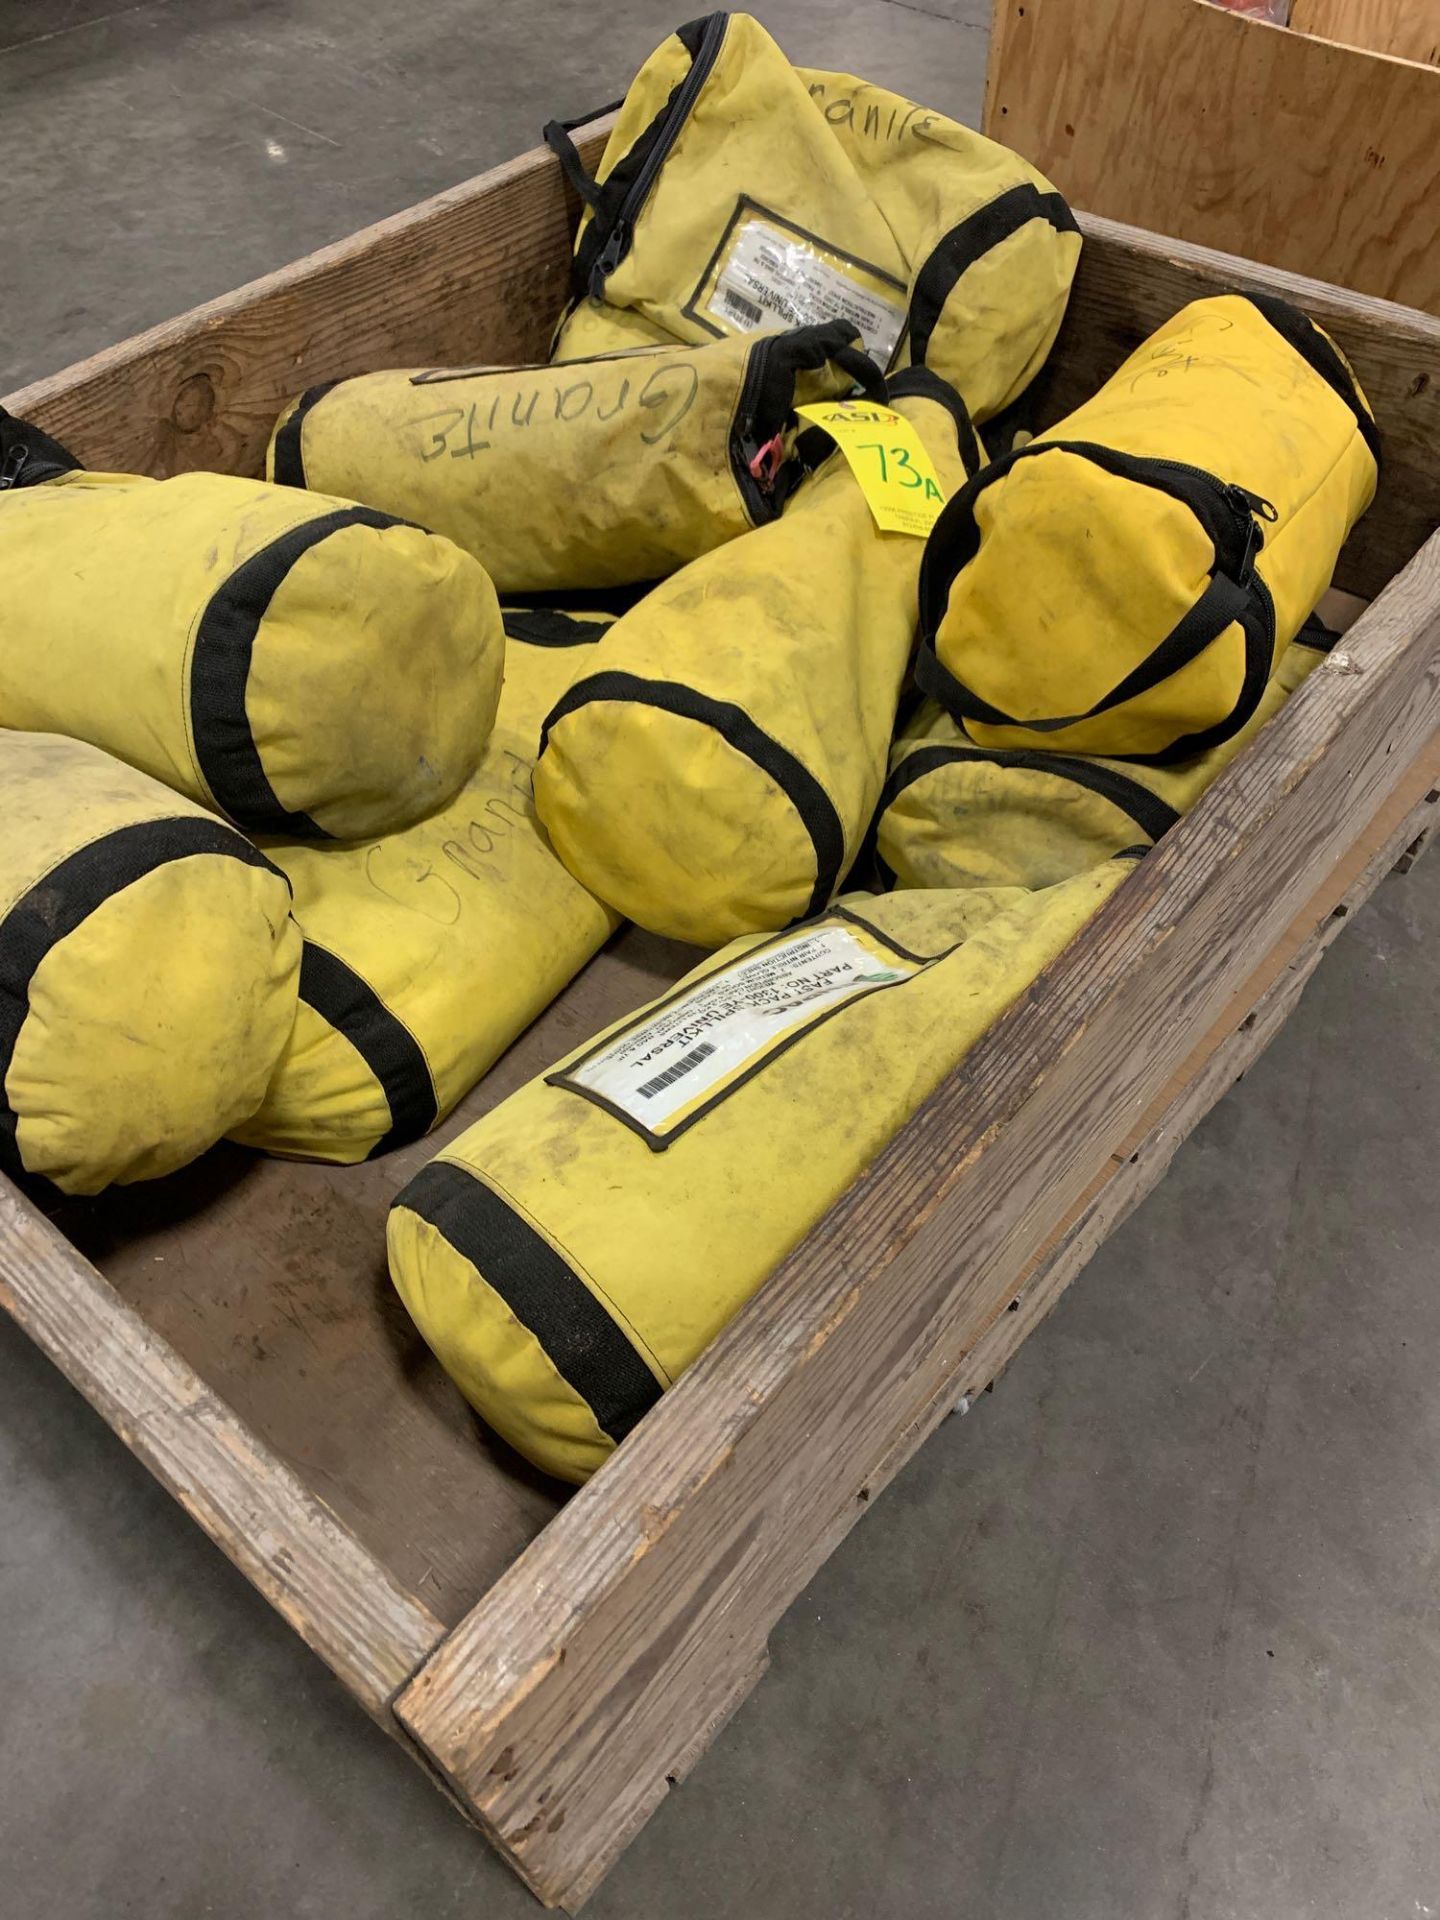 11 ENERPAC FAST PACK SPILLKIT 1300-YE UNIVERSAL IN CRATE - Image 3 of 4